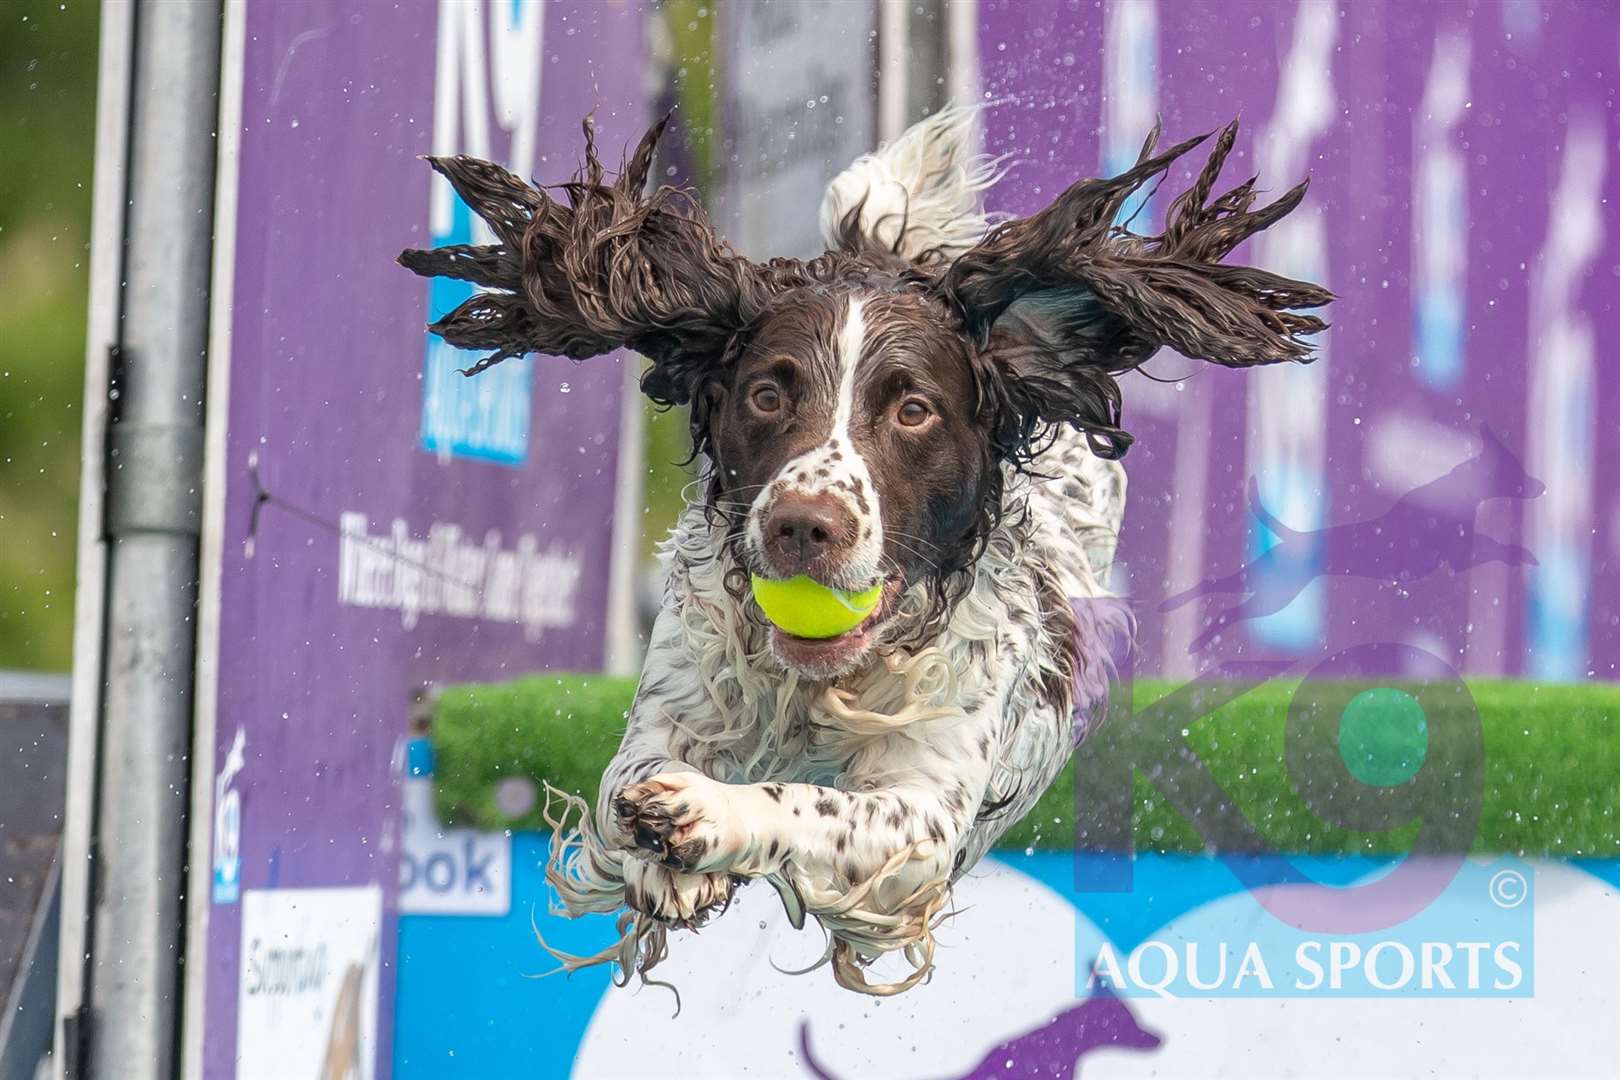 Paws in the Park will be making a splash with K9 Aqua Sports at the Kent Showground